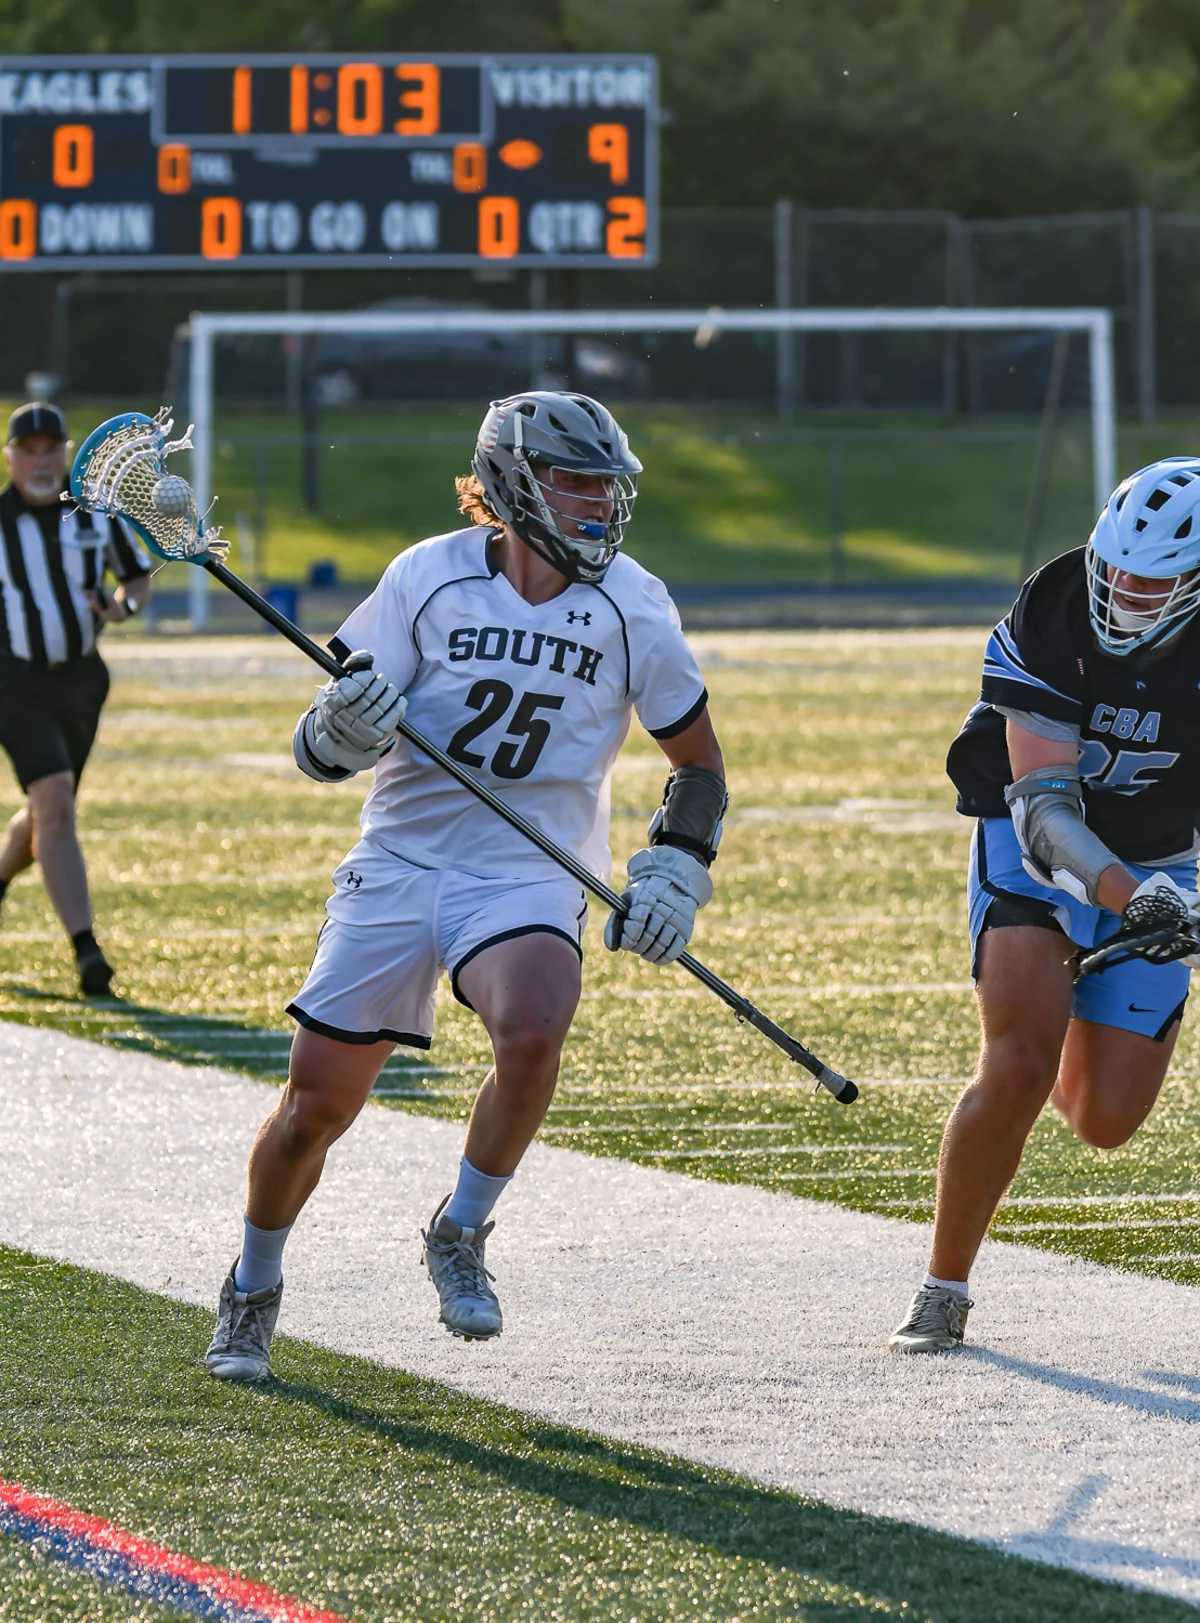 Shore Conference Boys Lacrosse Scores for Monday, May 24